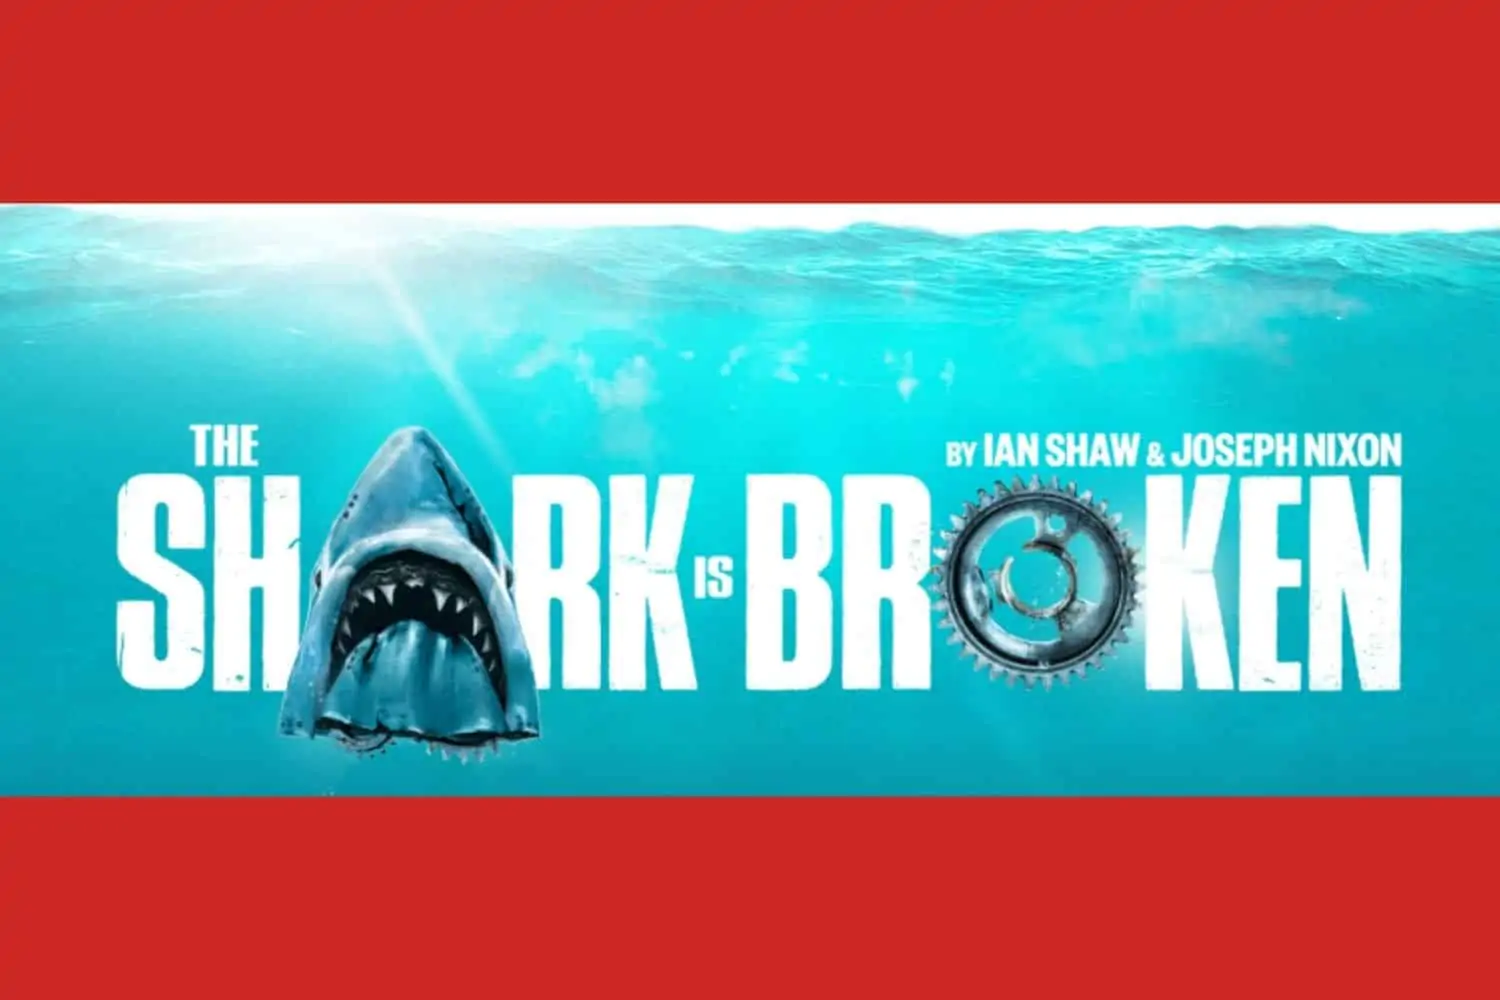 Behind-the-scenes feud from "JAWS" now a hit play - "THE SHARK IS BROKEN"